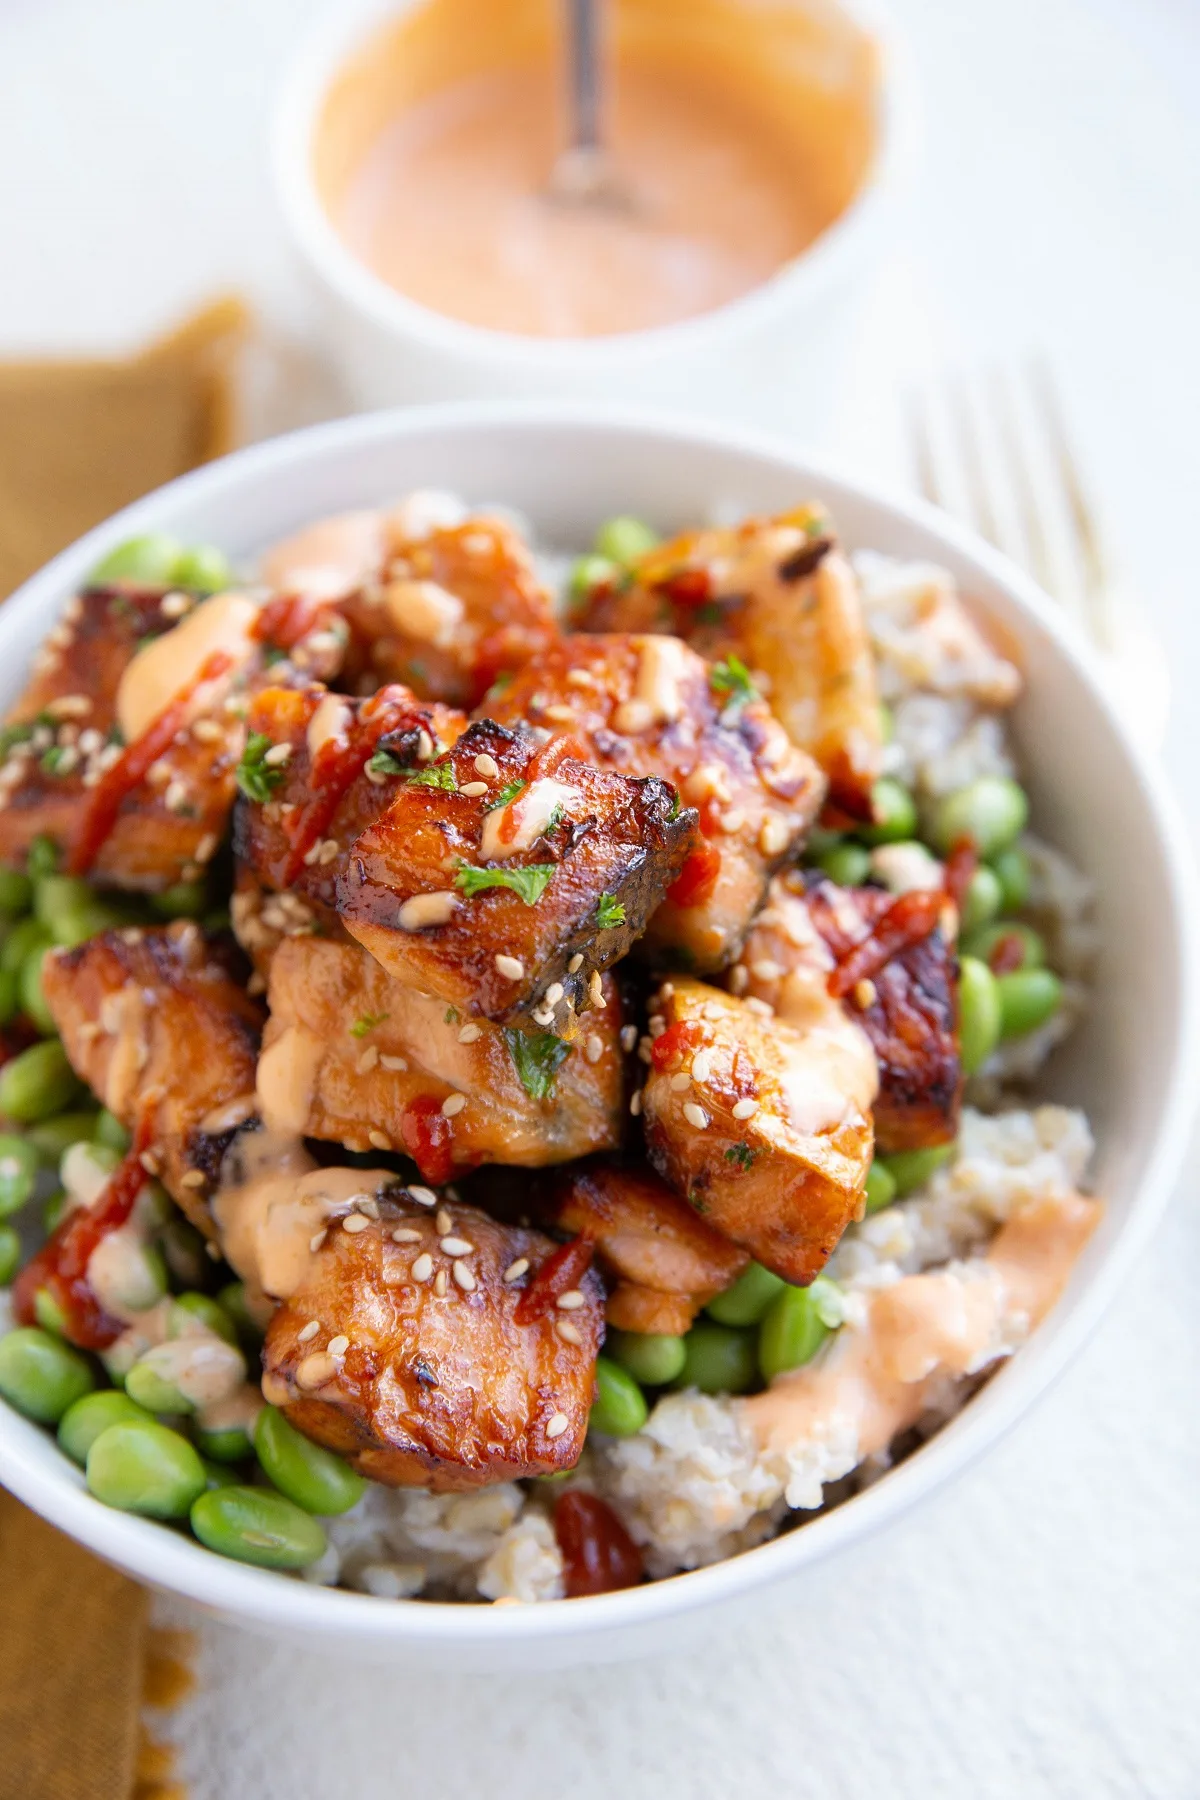 Air fryer salmon bites in a bowl with edamame, brown rice, sriracha and spicy mayo sauce. A complete meal, ready to eat.